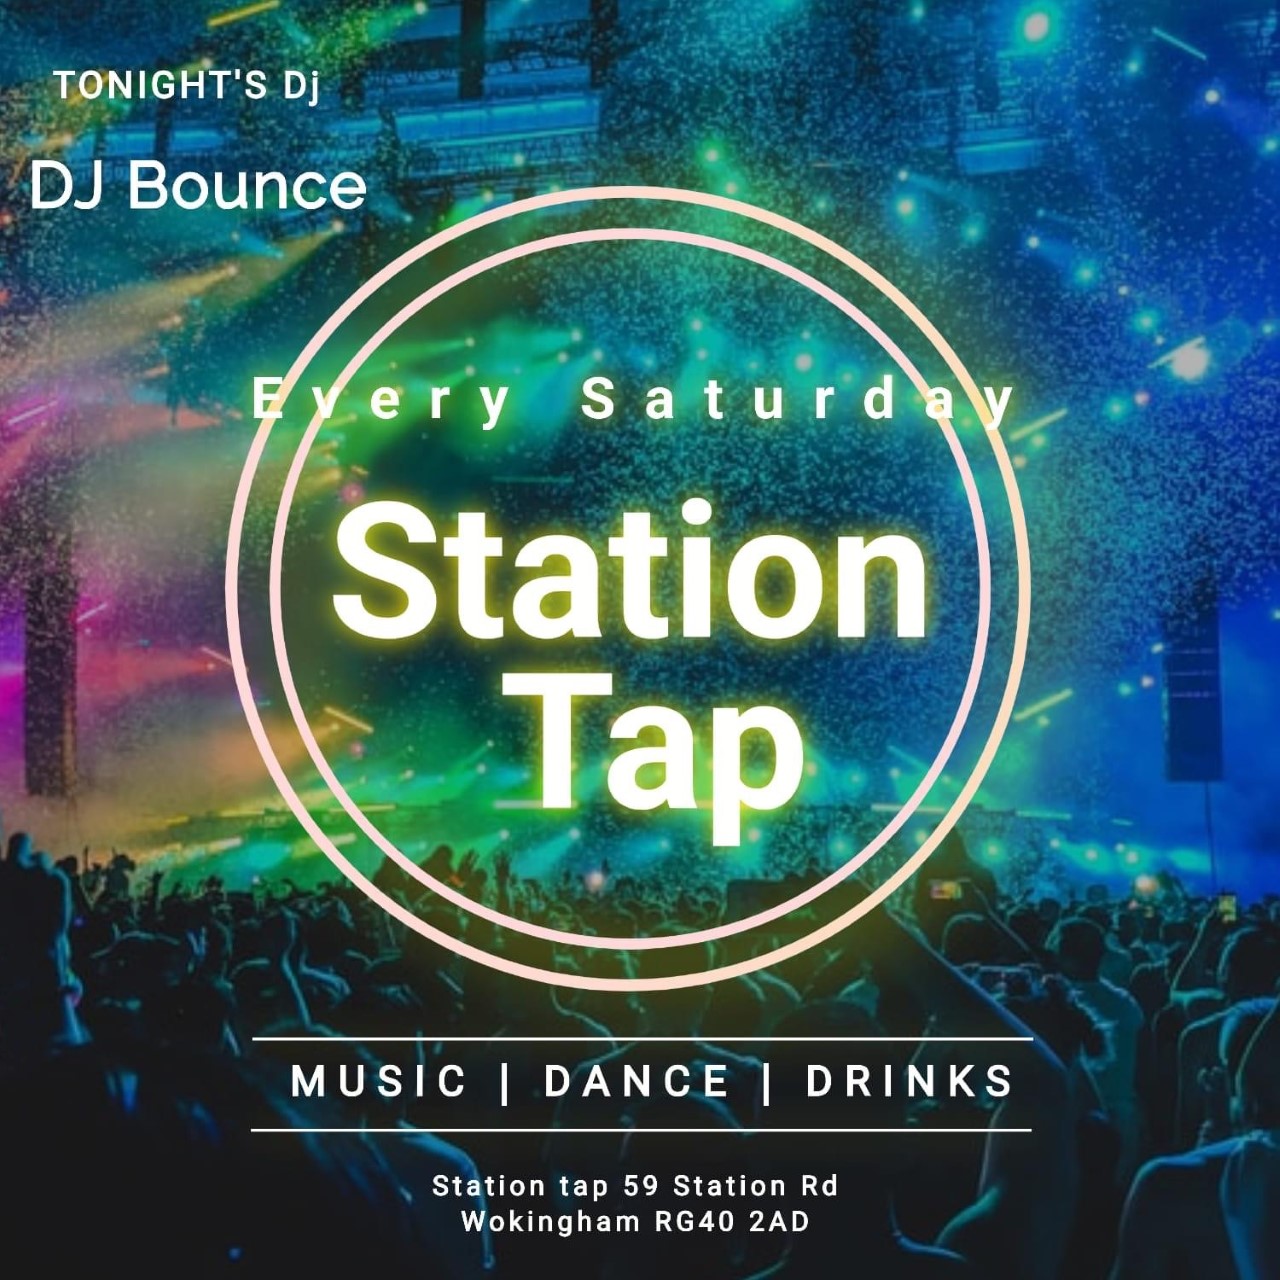 DJ Bounce at The Station Tap